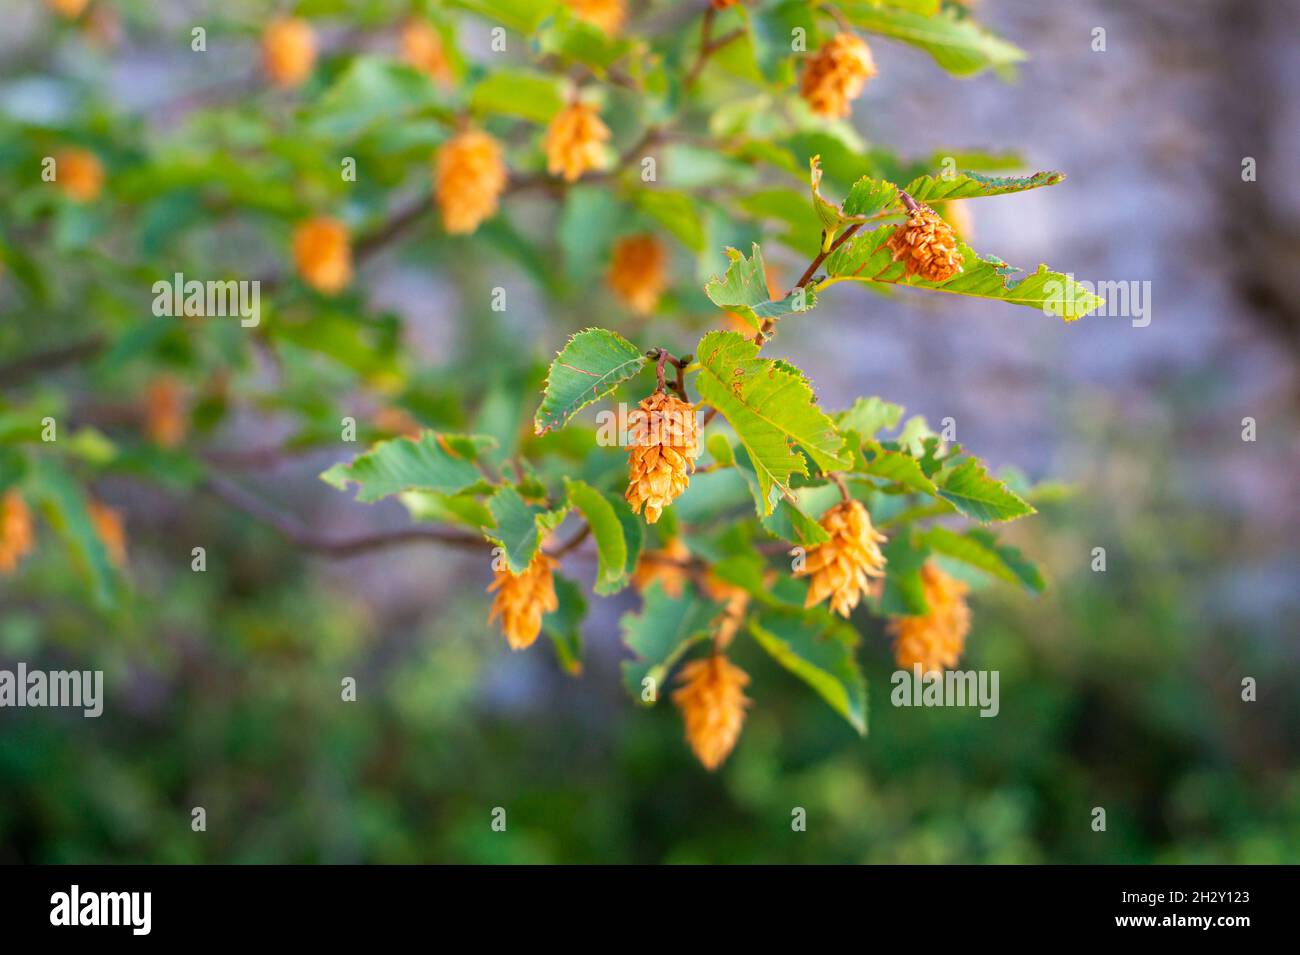 Yellow flowers blooming on tree Stock Photo